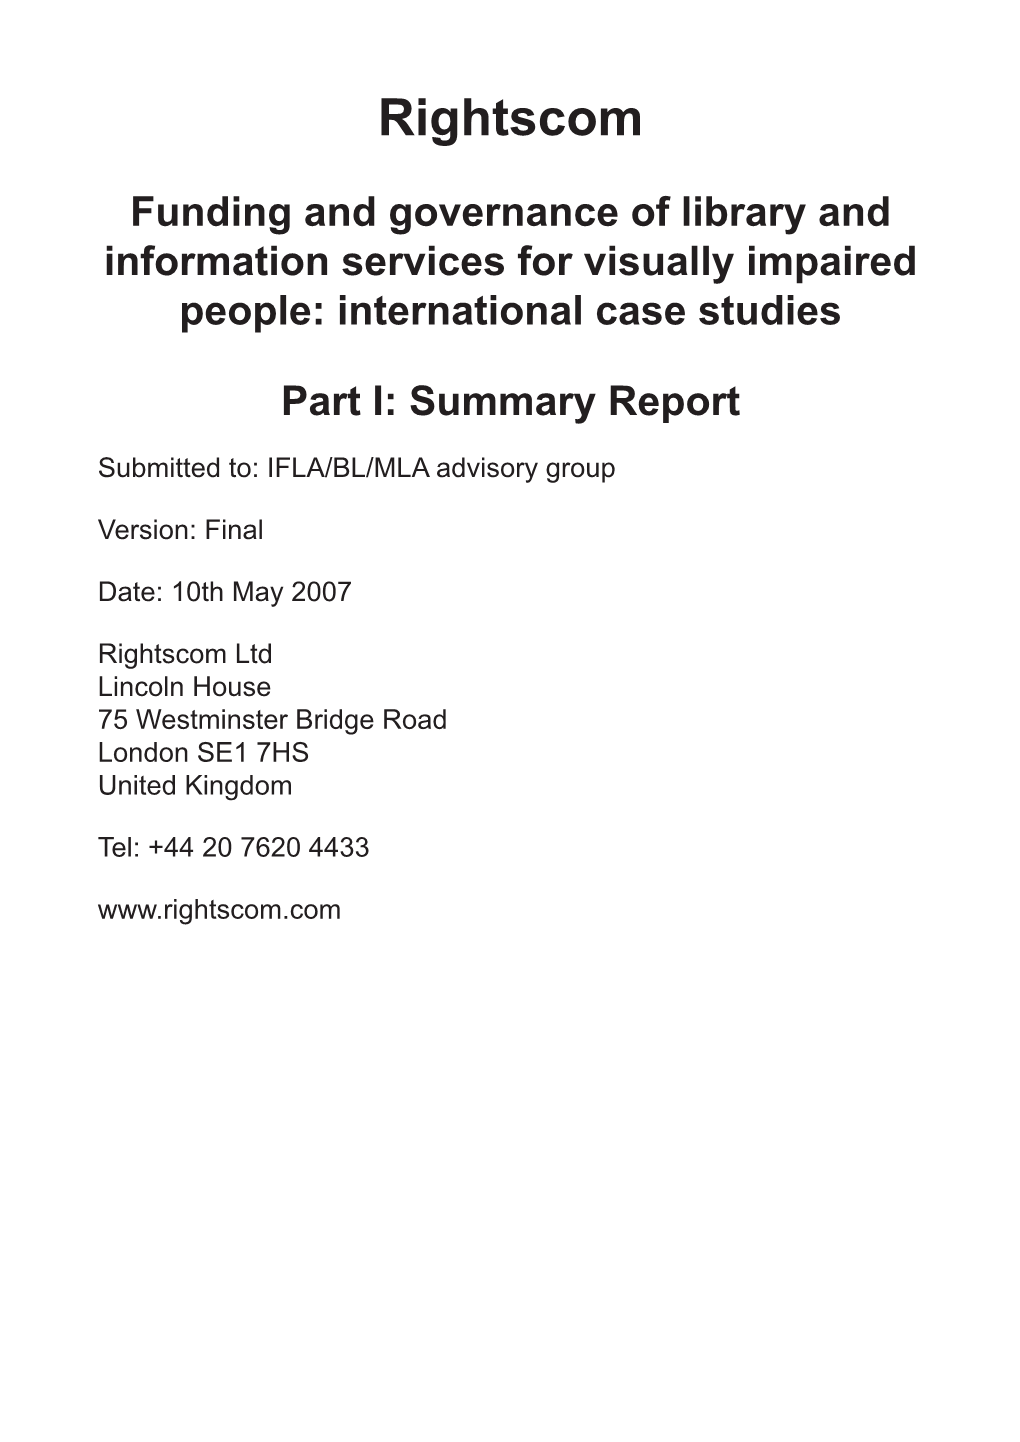 Funding and Governance of Library and Information Services for Visually Impaired People: International Case Studies